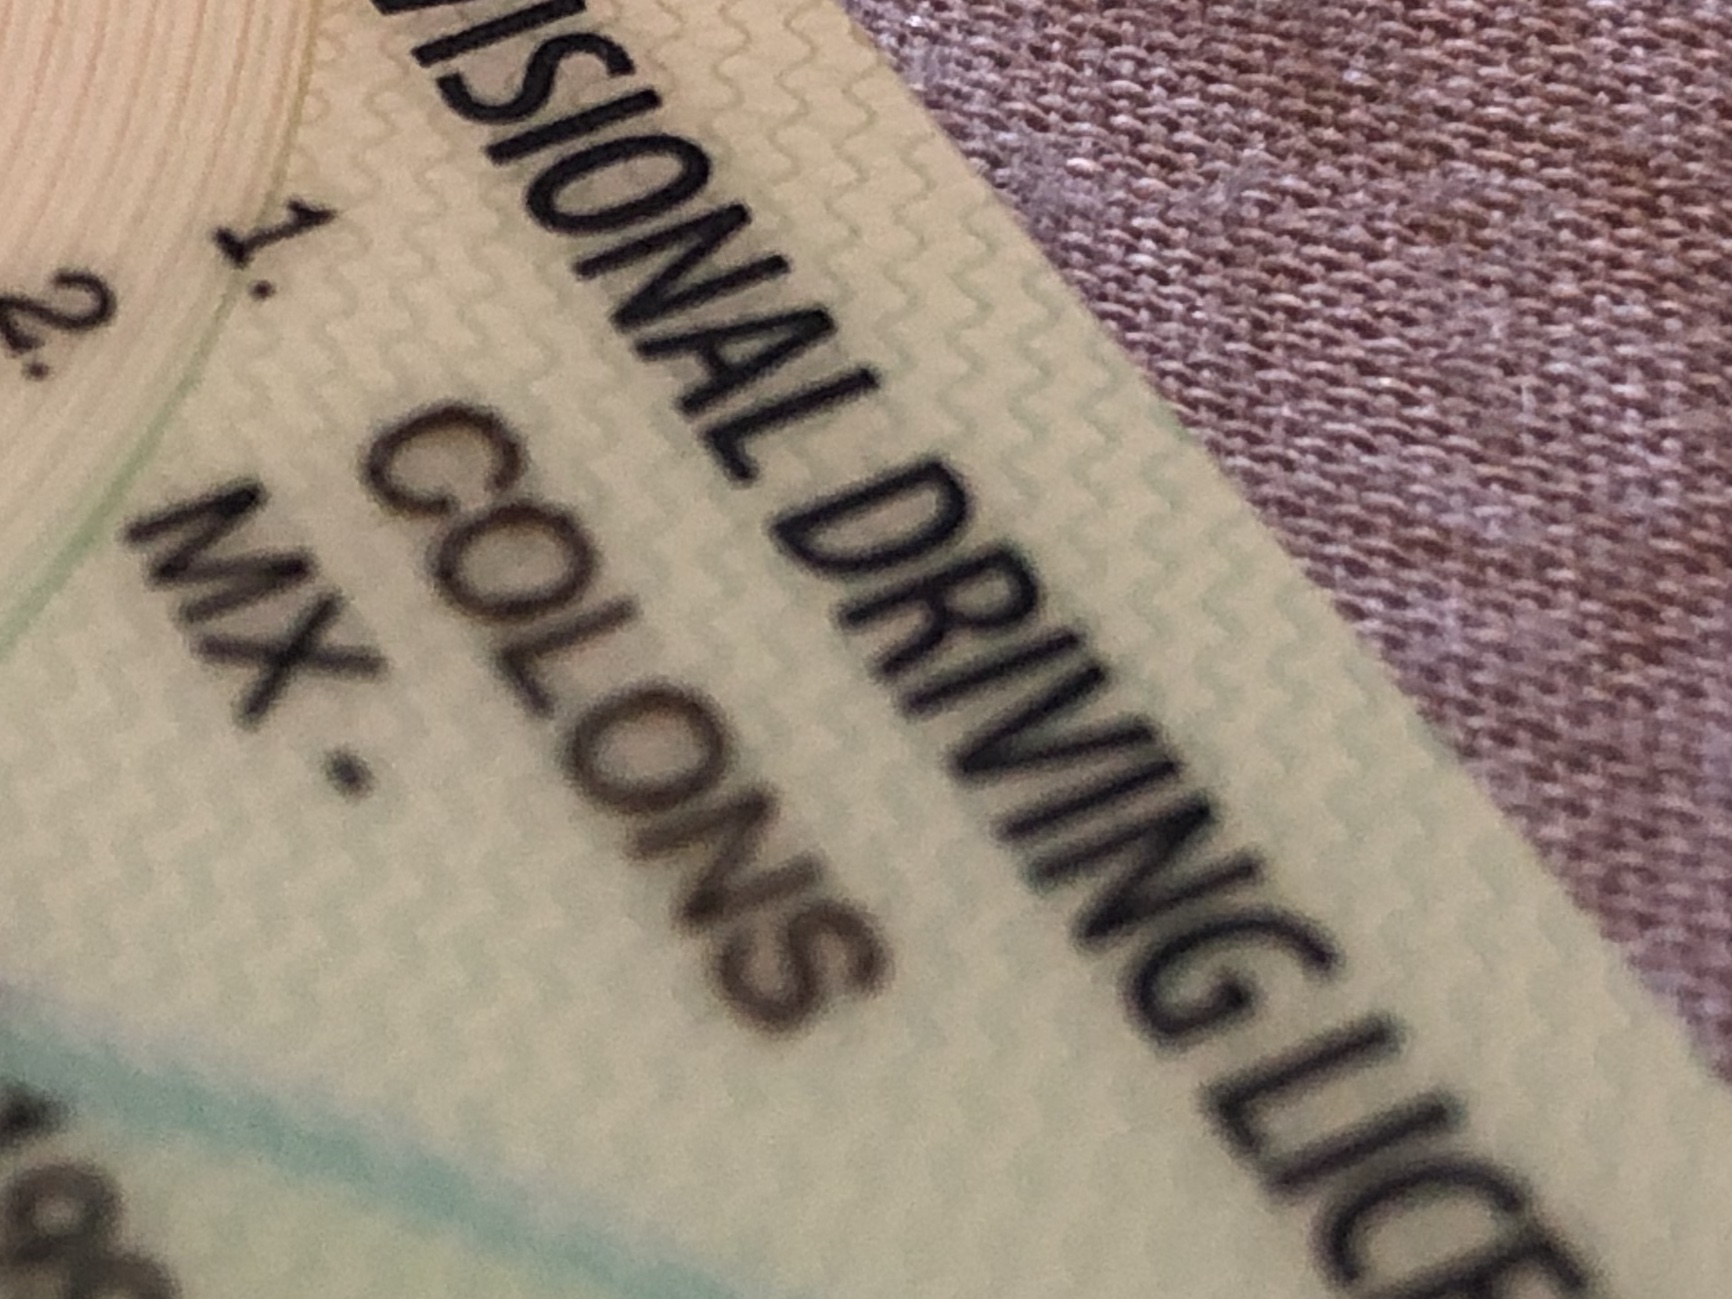 Extreme close-up of a UK drivers license for someone with the name "MX - COLONS"